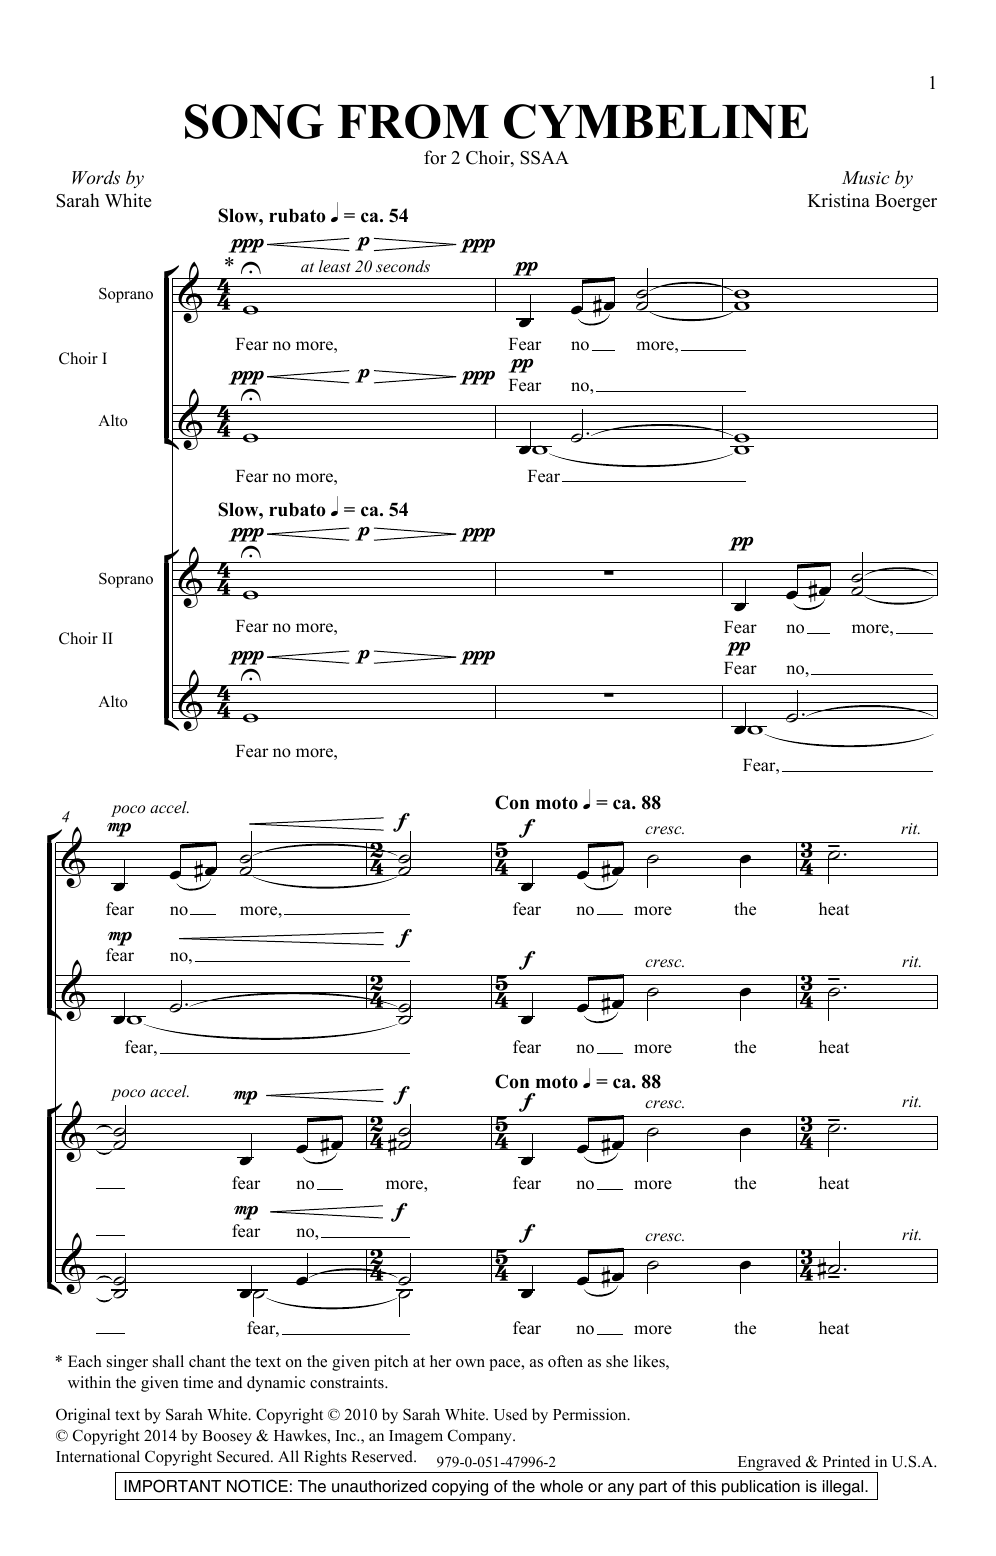 Download Kristina Boerger Song From Cymbeline Sheet Music